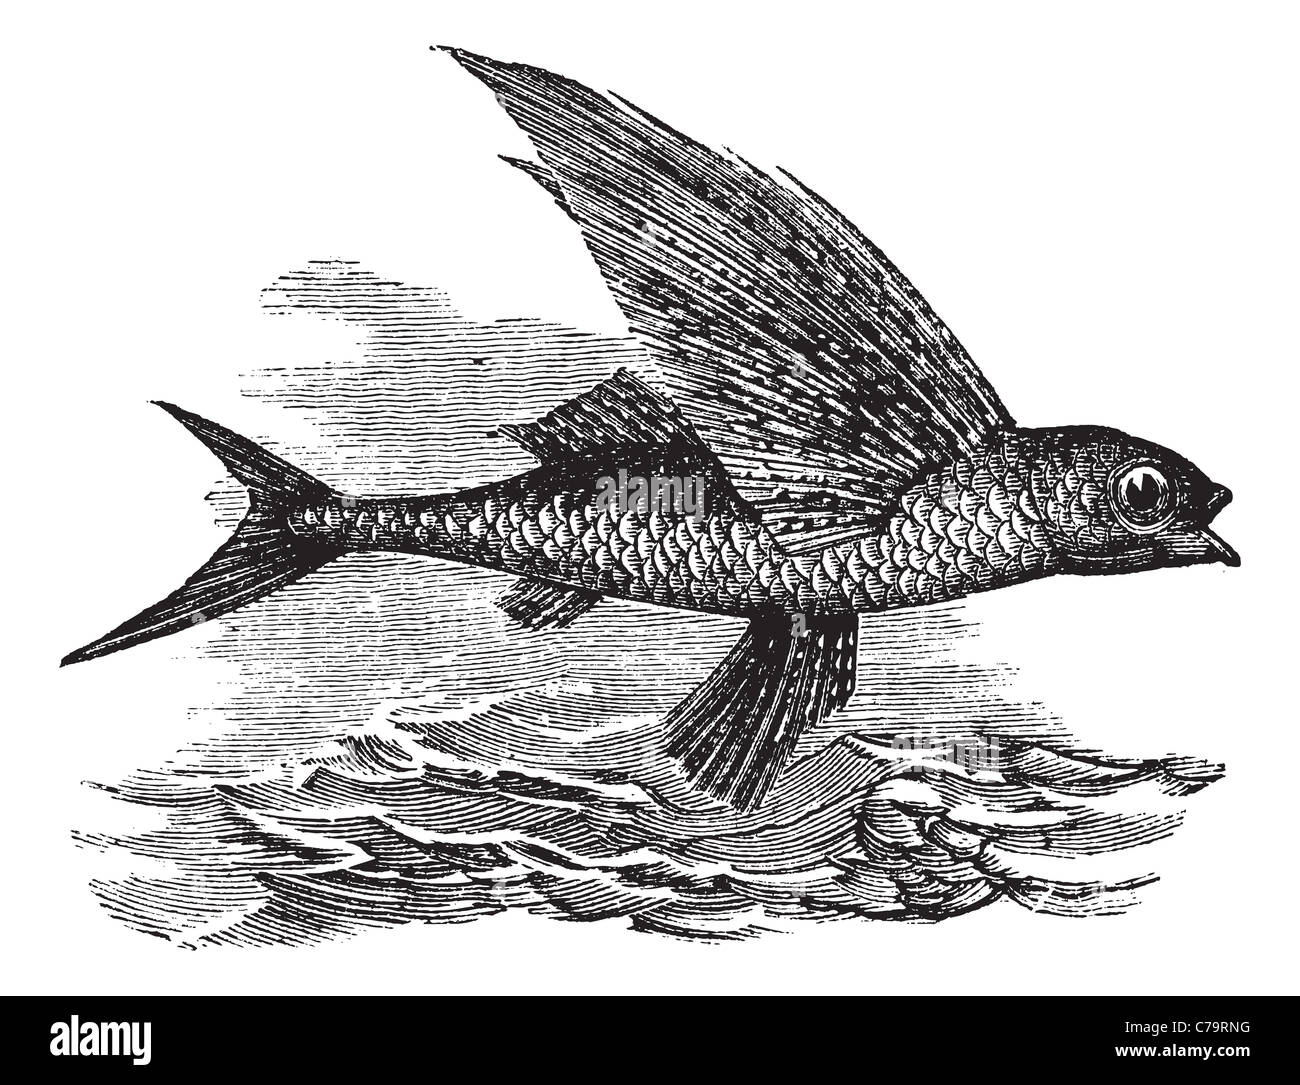 Flying Fish or Exocoetidae, vintage engraving. Old engraved illustration of a Flying Fish. Stock Photo